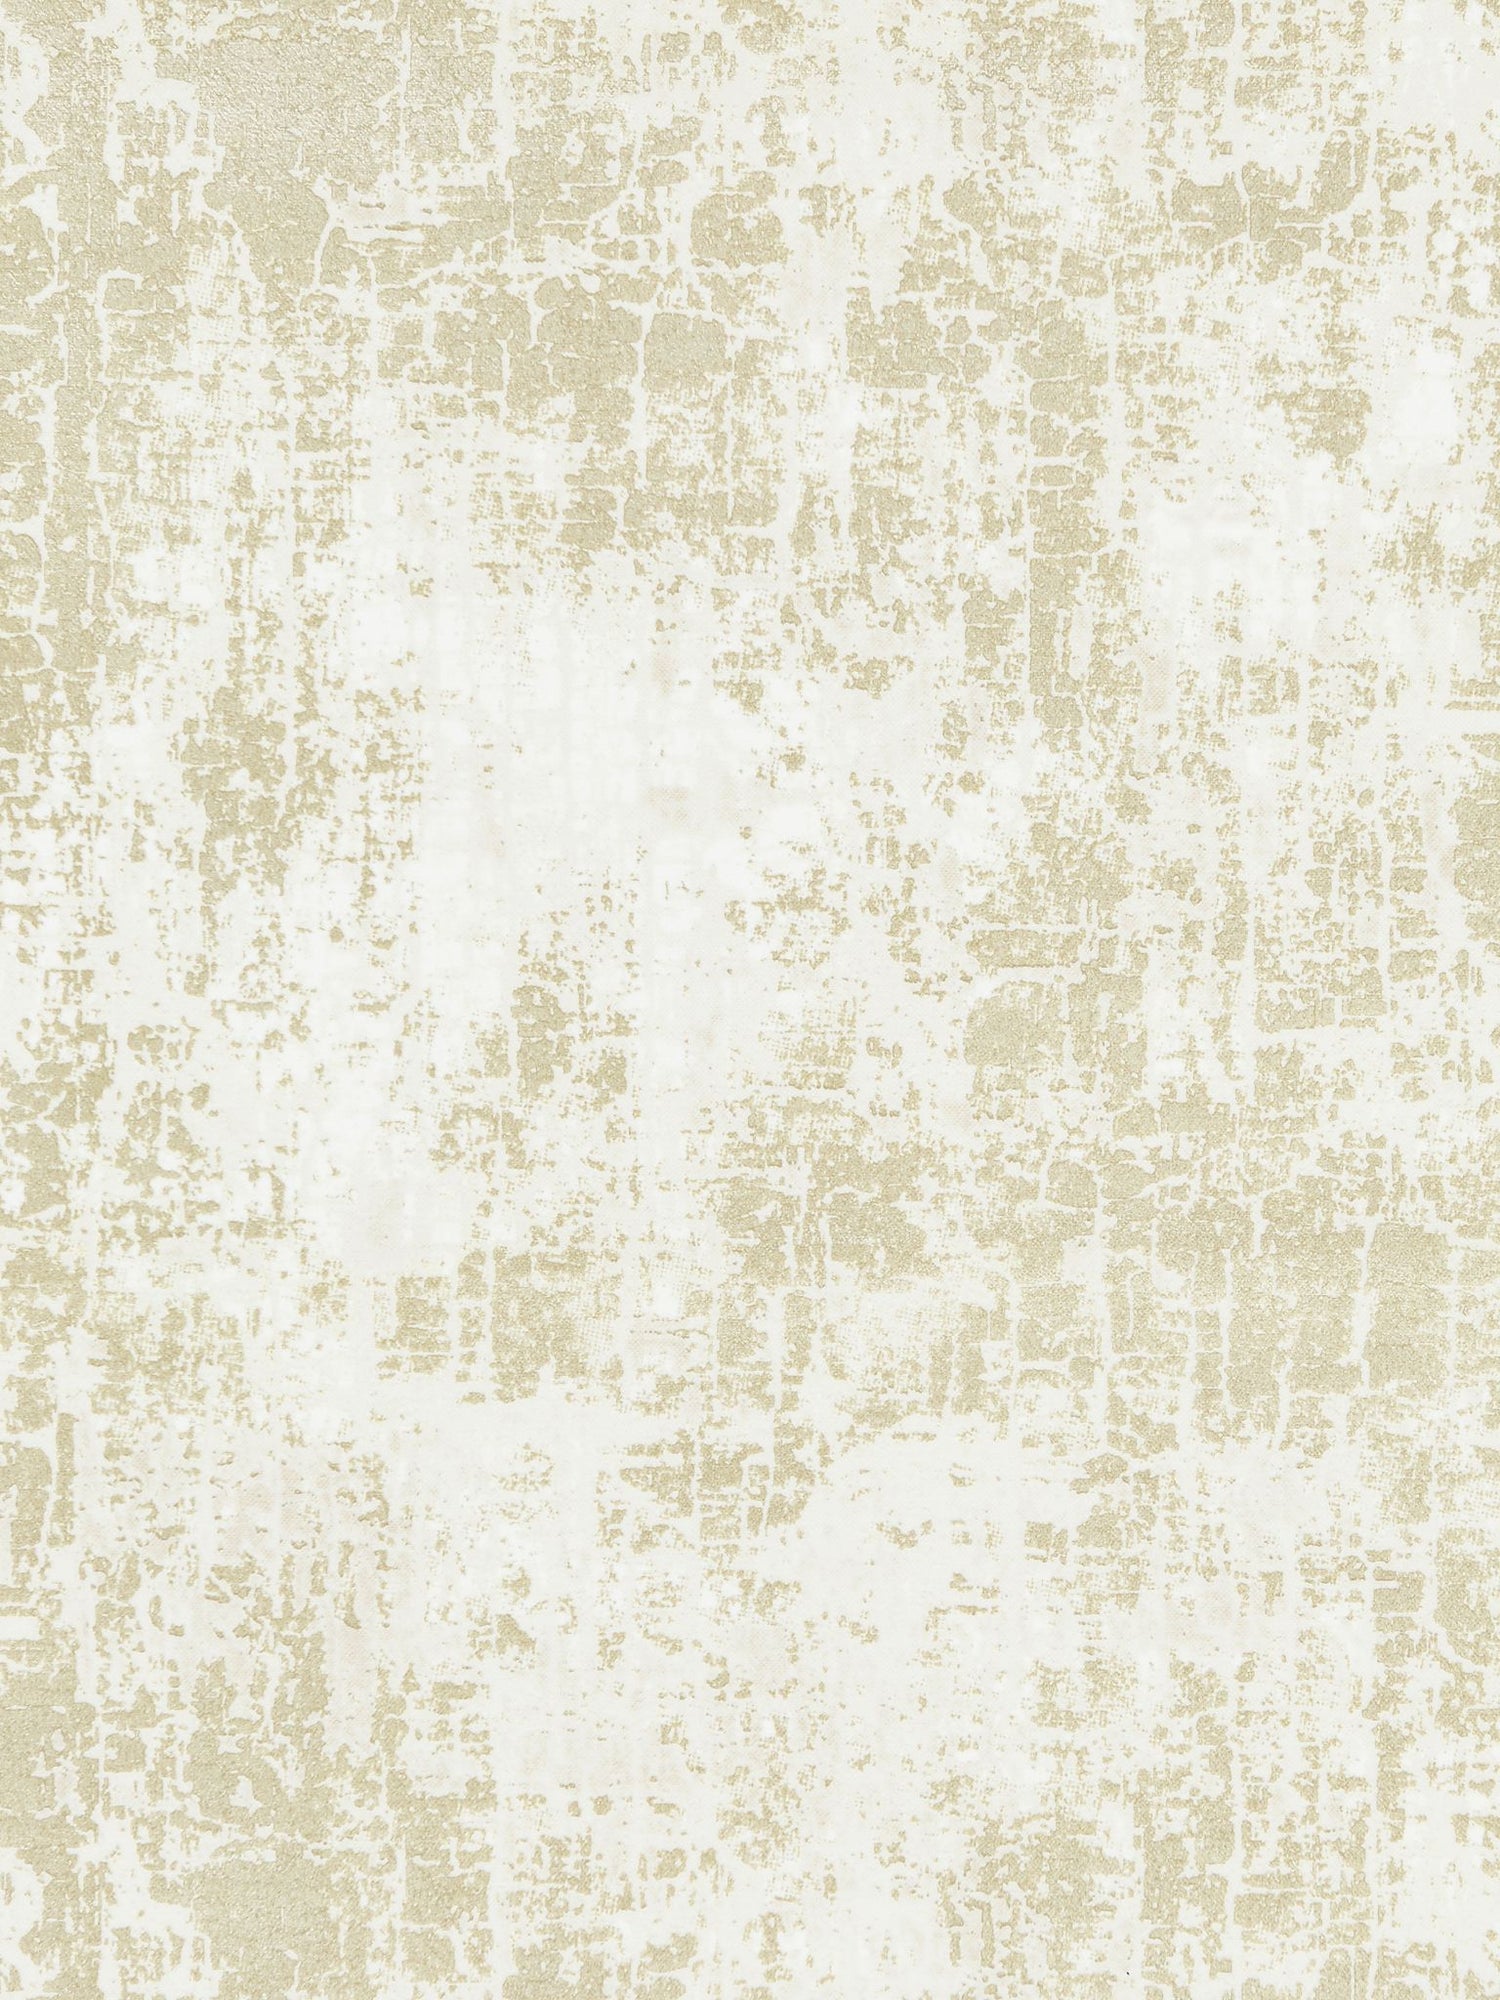 Tesoro Printed Velvet fabric in champagne color - pattern number SC 000216617 - by Scalamandre in the Scalamandre Fabrics Book 1 collection